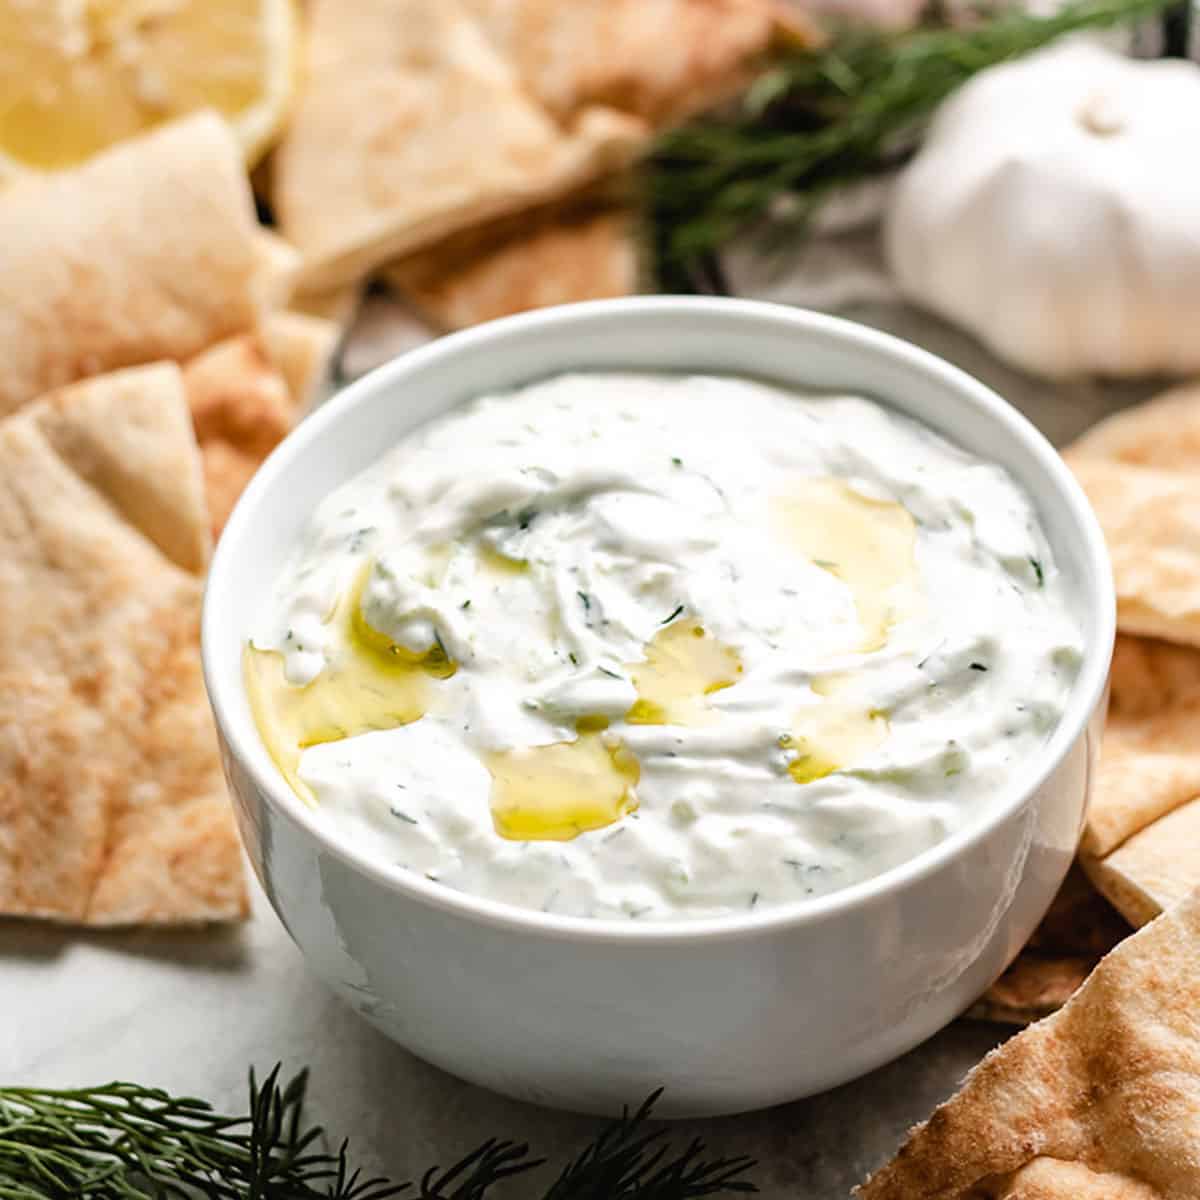 The finished tzatziki sauce served with pita chips.